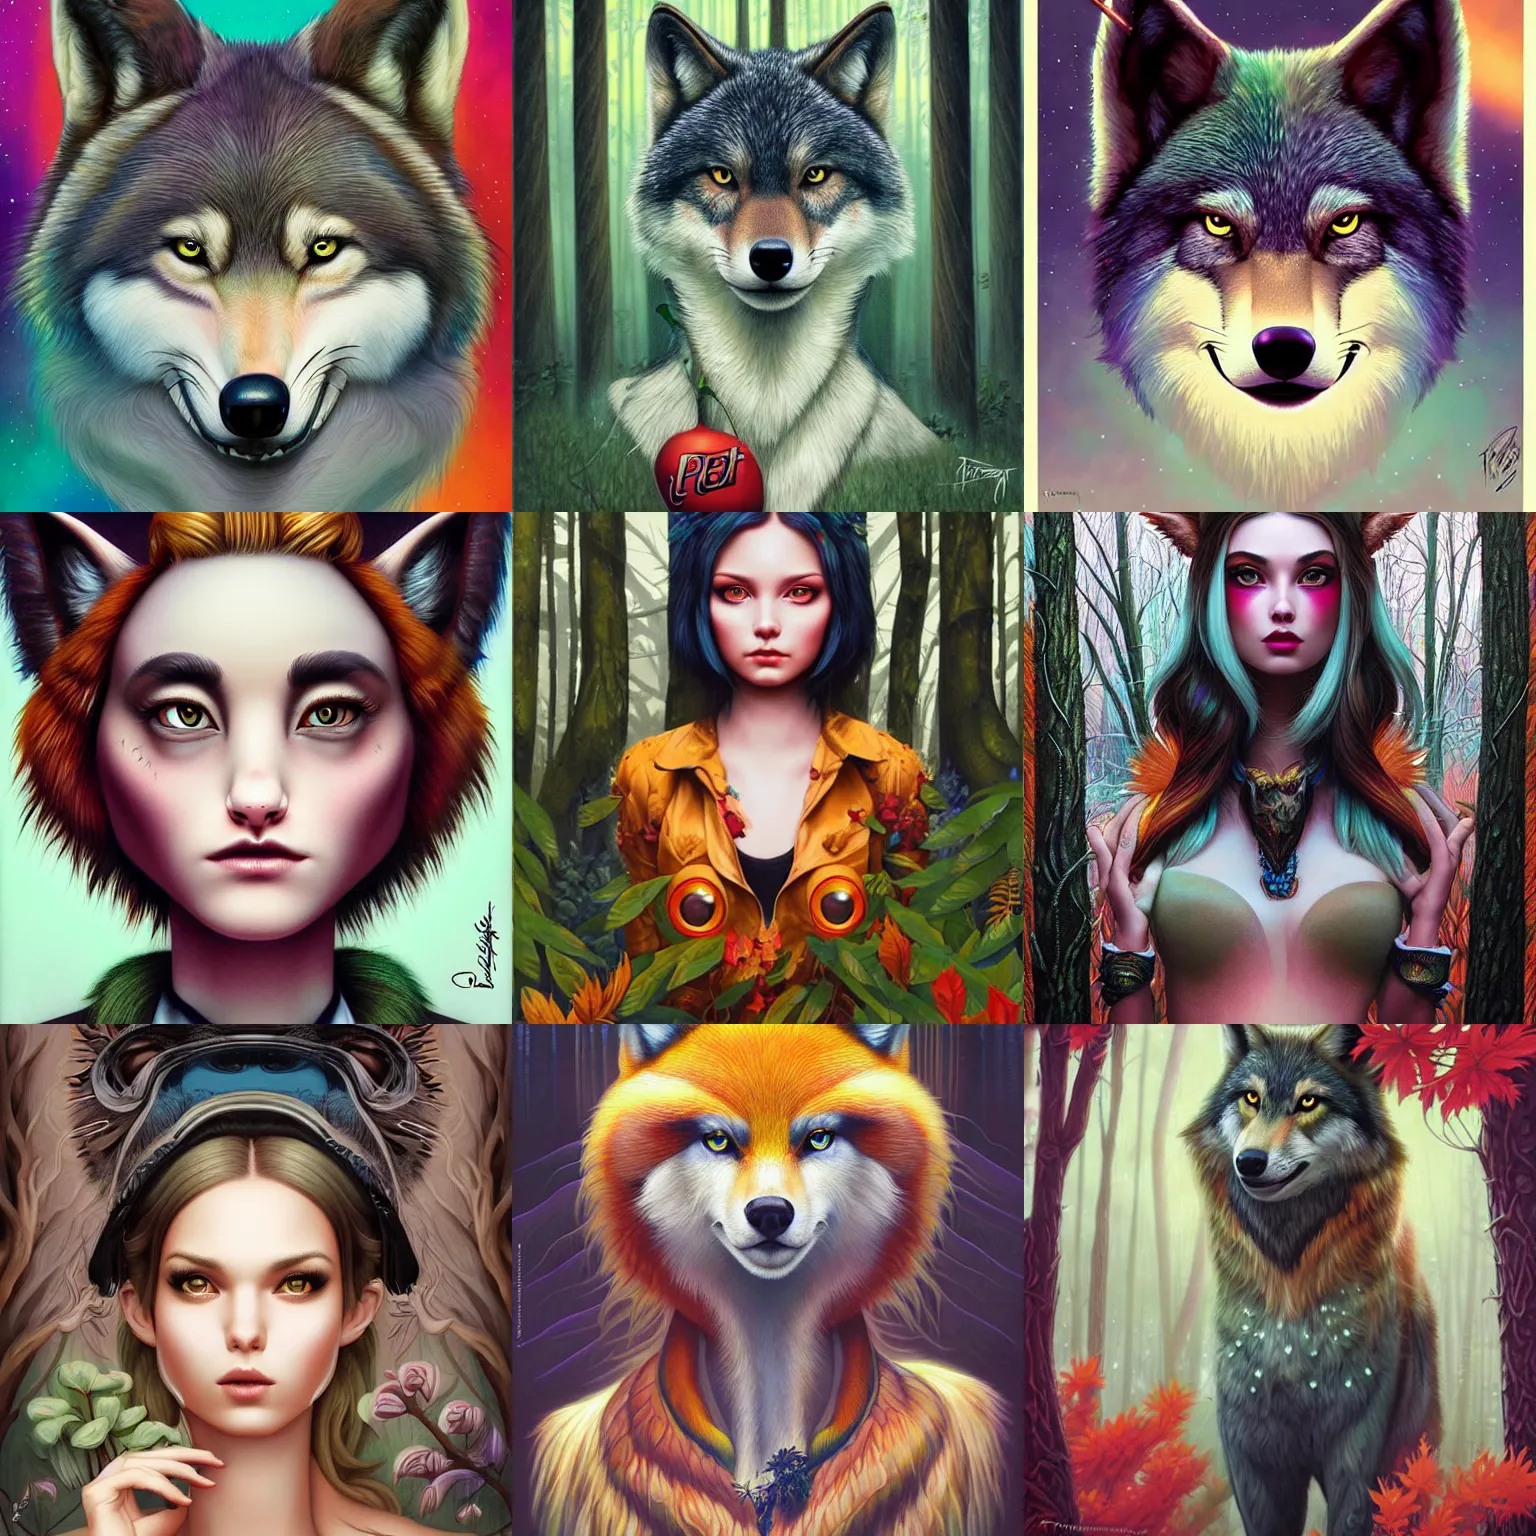 Prompt: Forestpunk wolf portrait Pixar style, by Tristan Eaton Stanley Artgerm and Tom Bagshaw